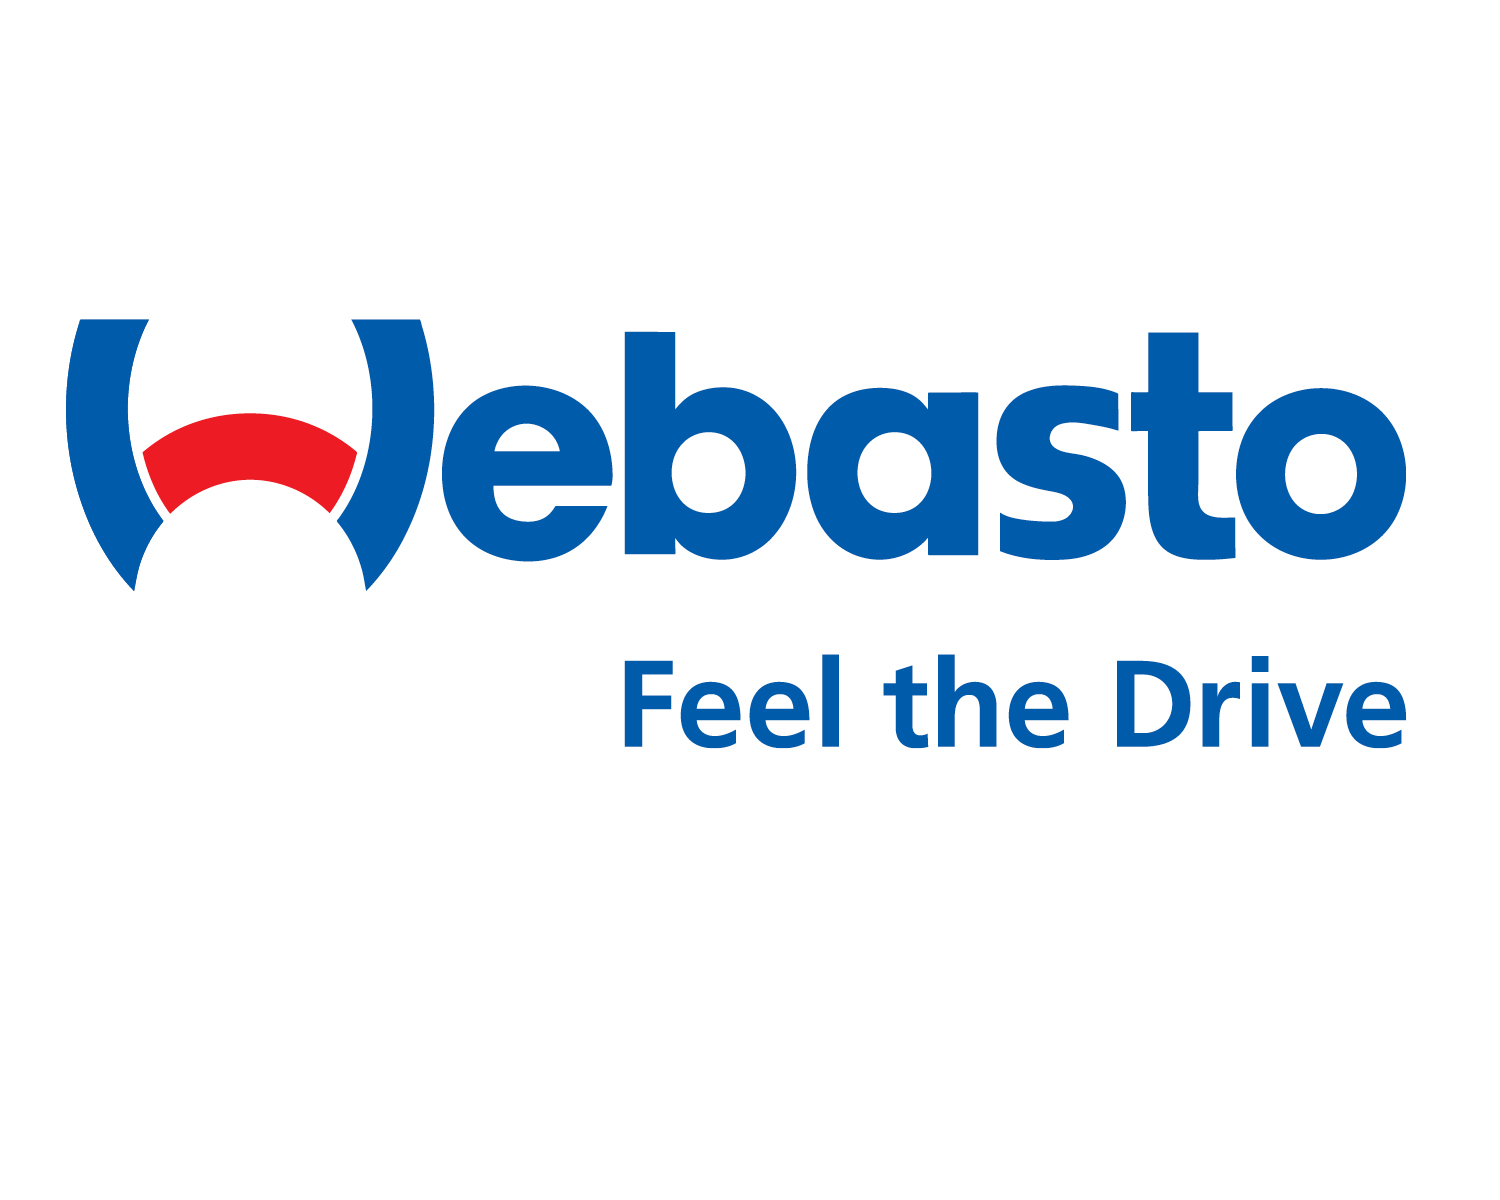 Webasto is the global leader for equipment and vehicle heating and cooling solutions.